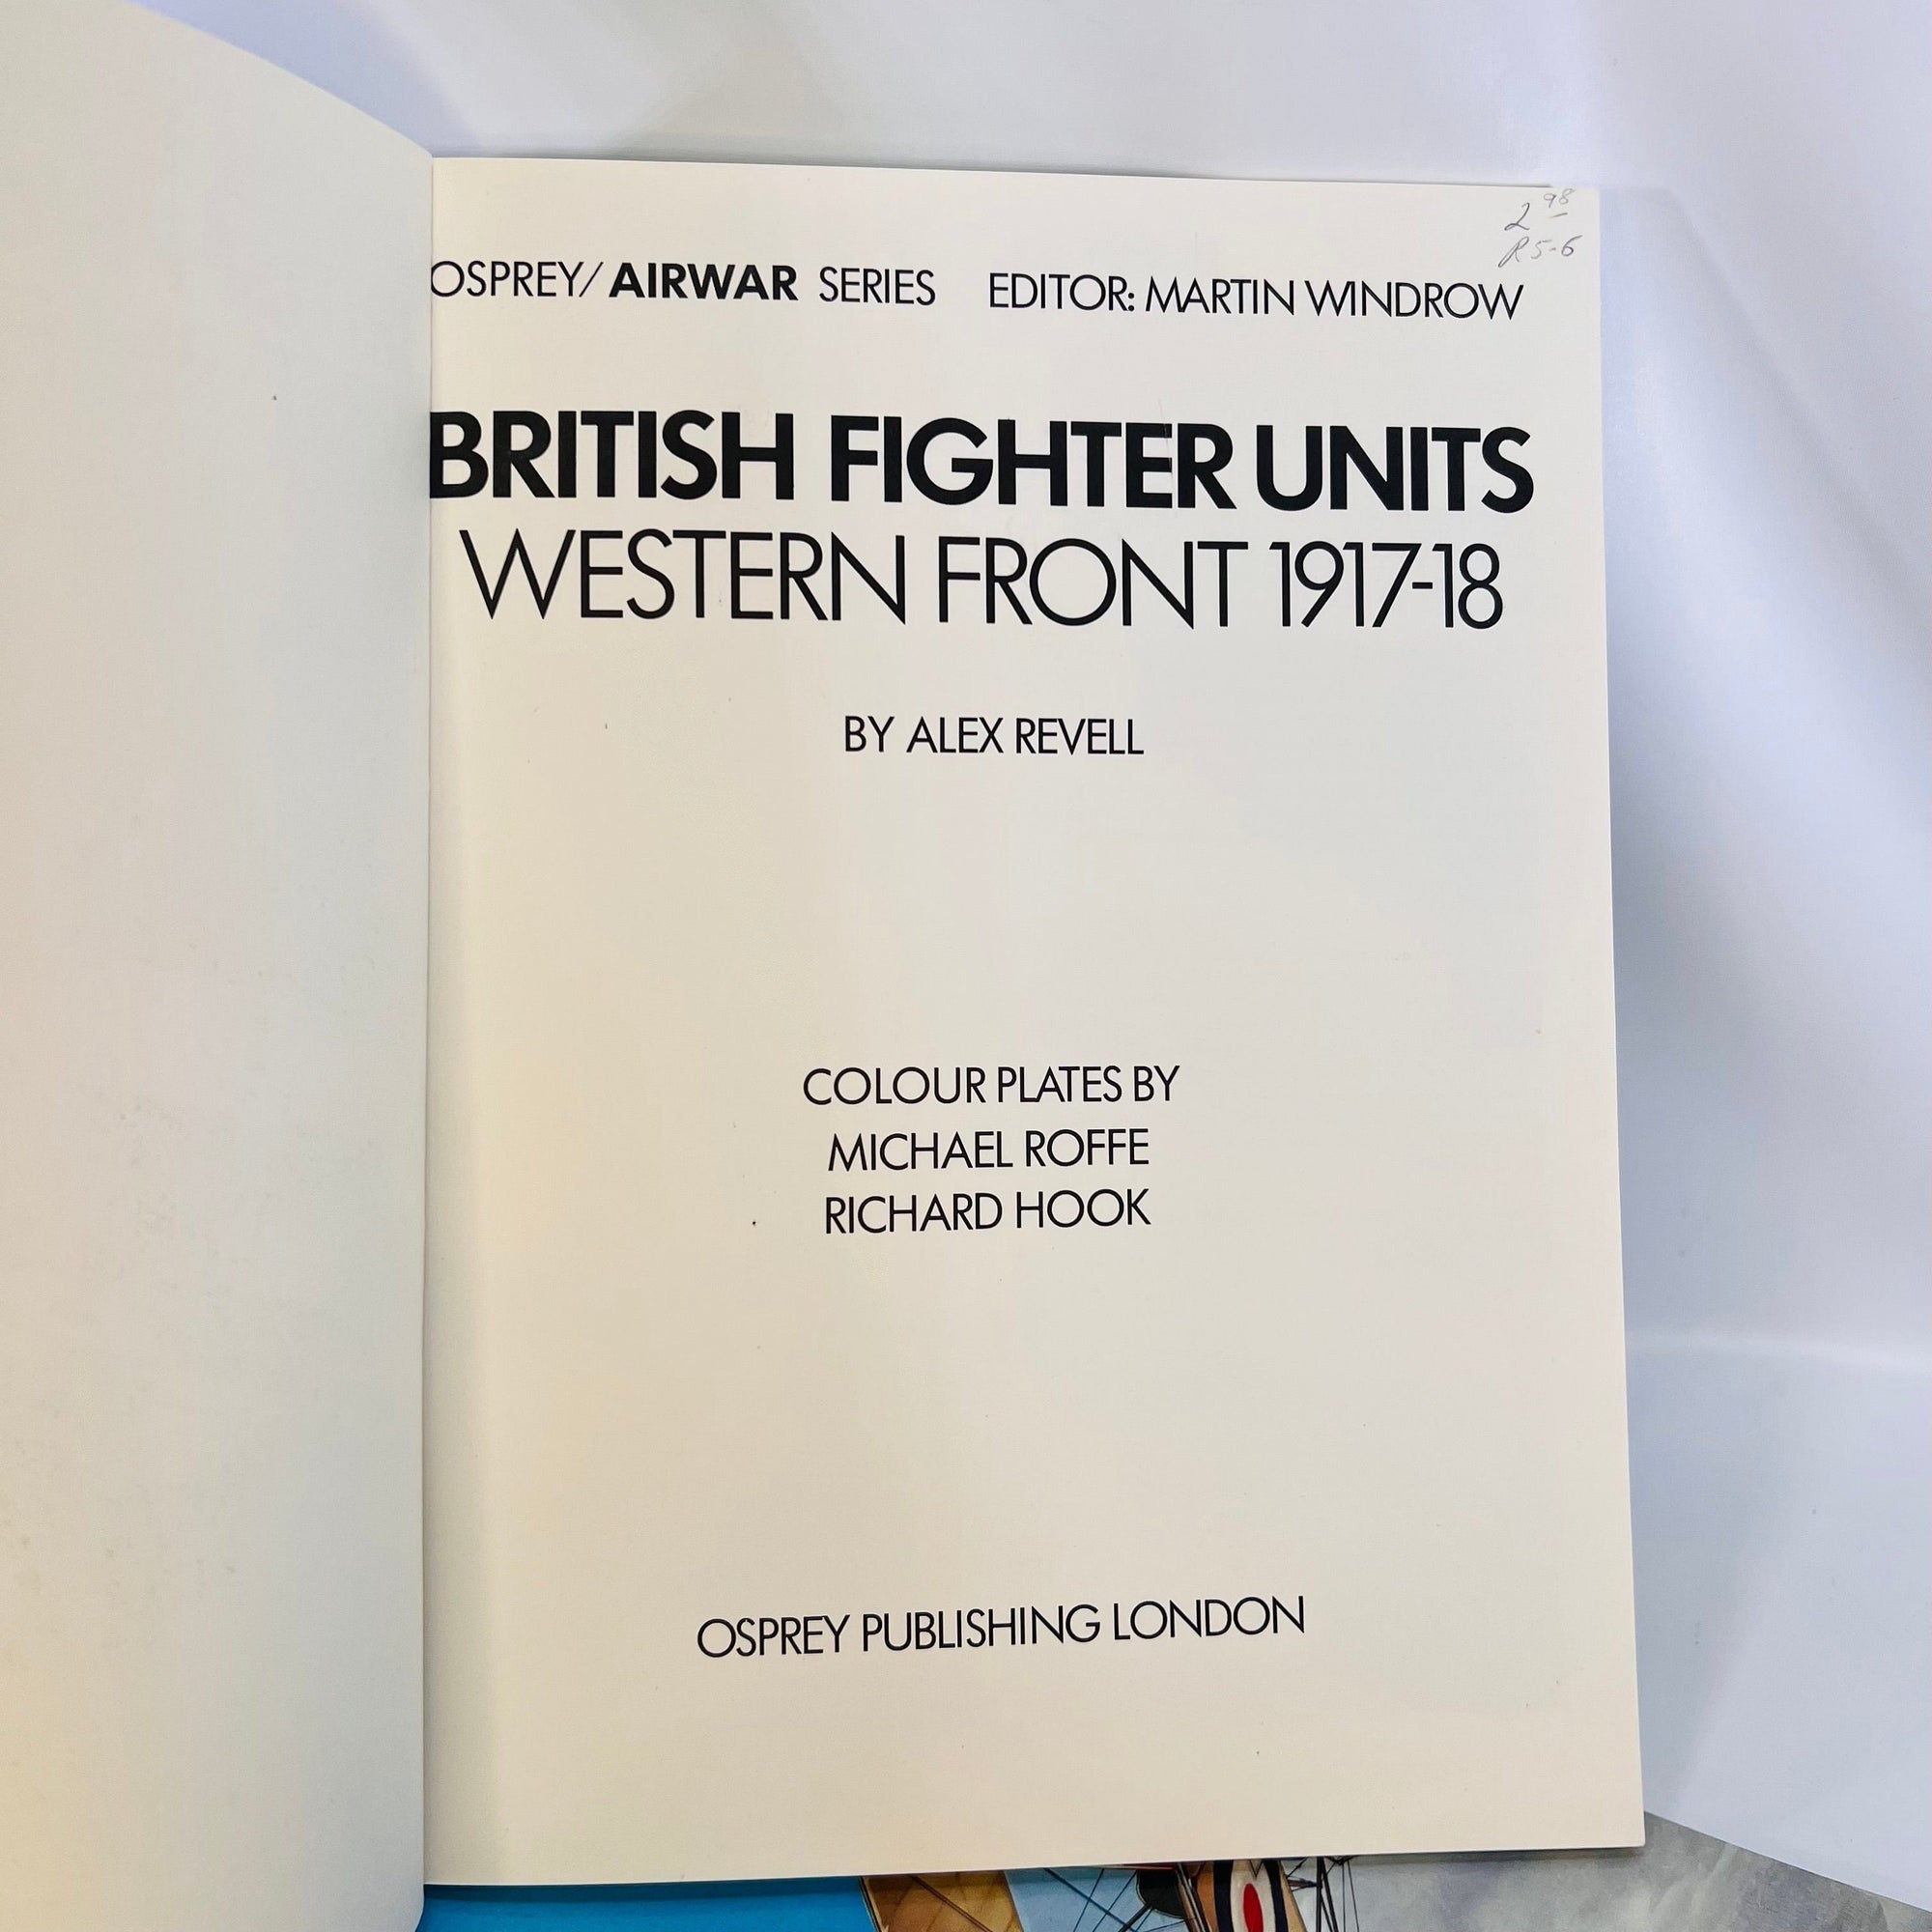 British Fighter Units Western Front 1914-16 & 1917-18 Two Softcover Books by Alex Revell 1978 Osprey Publishing Vintage Book